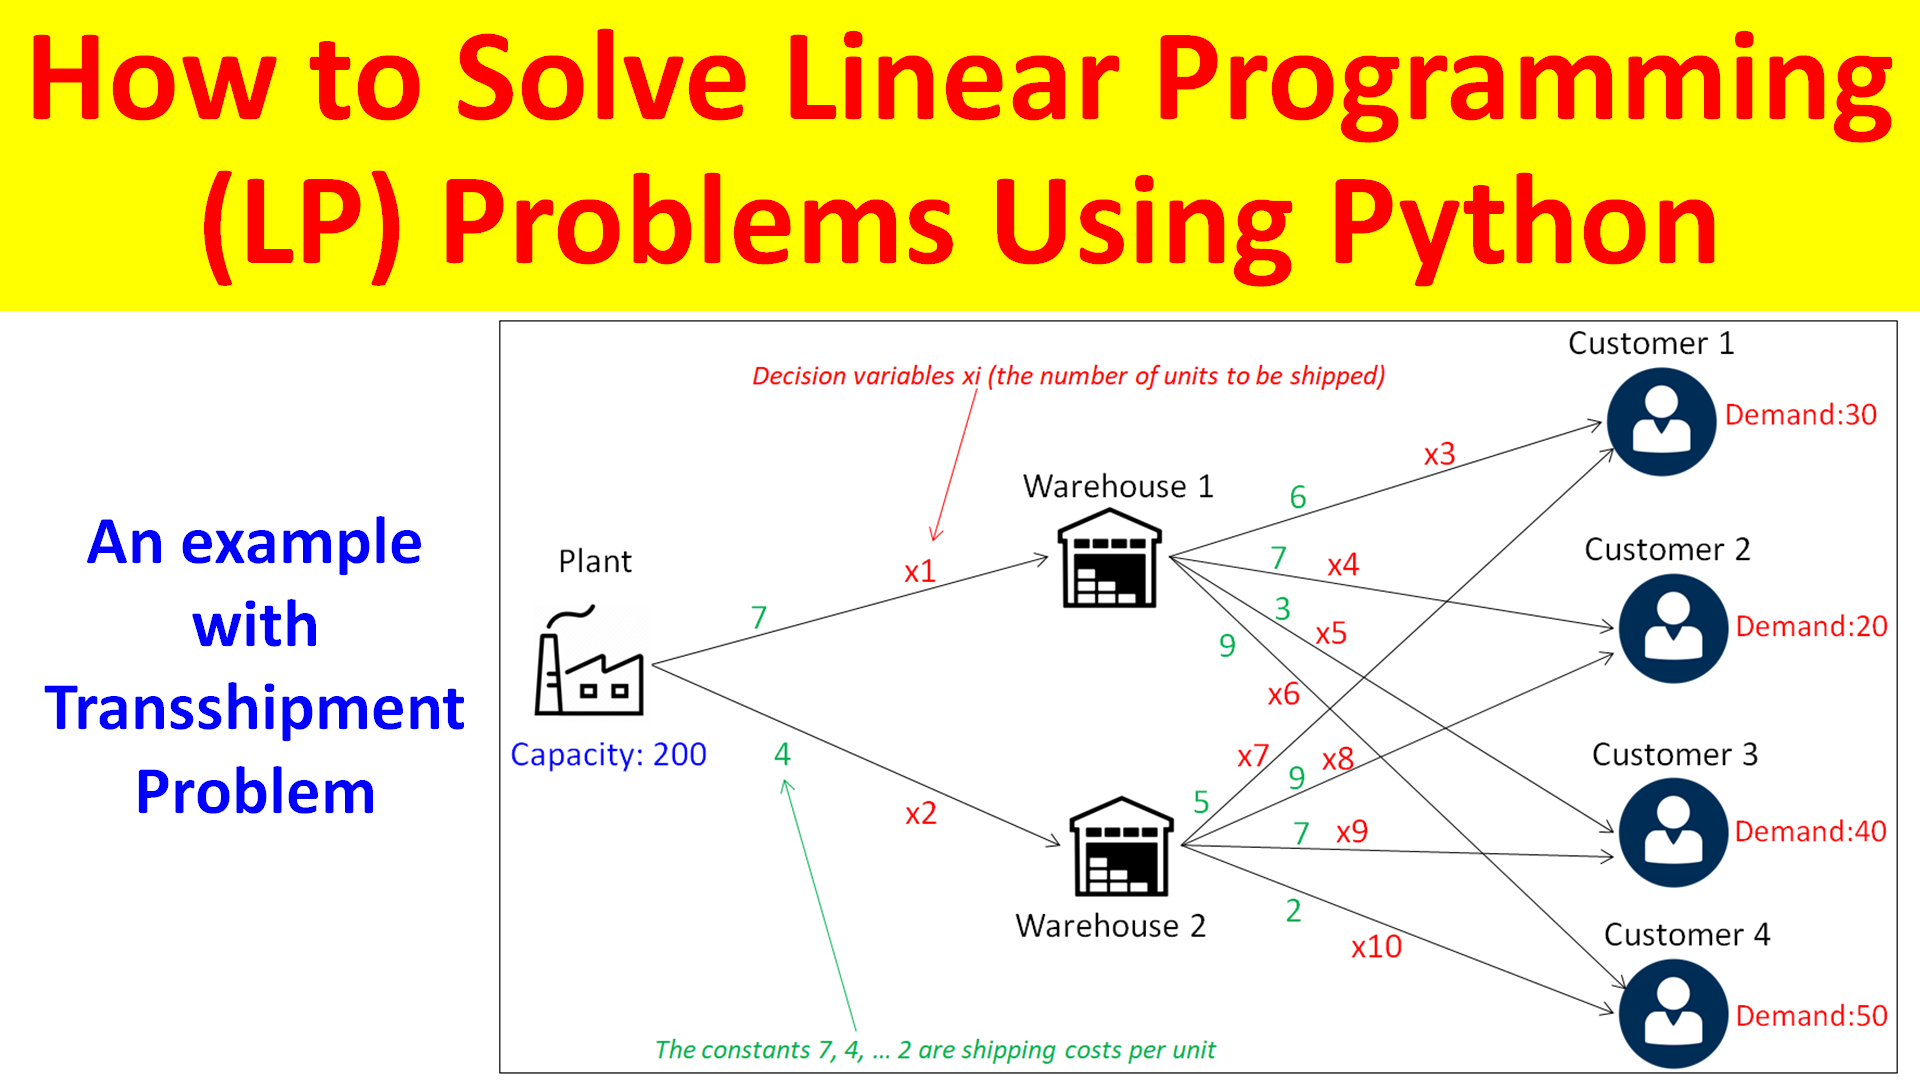 How to Solve Linear Programming (LP) Problems Using Python